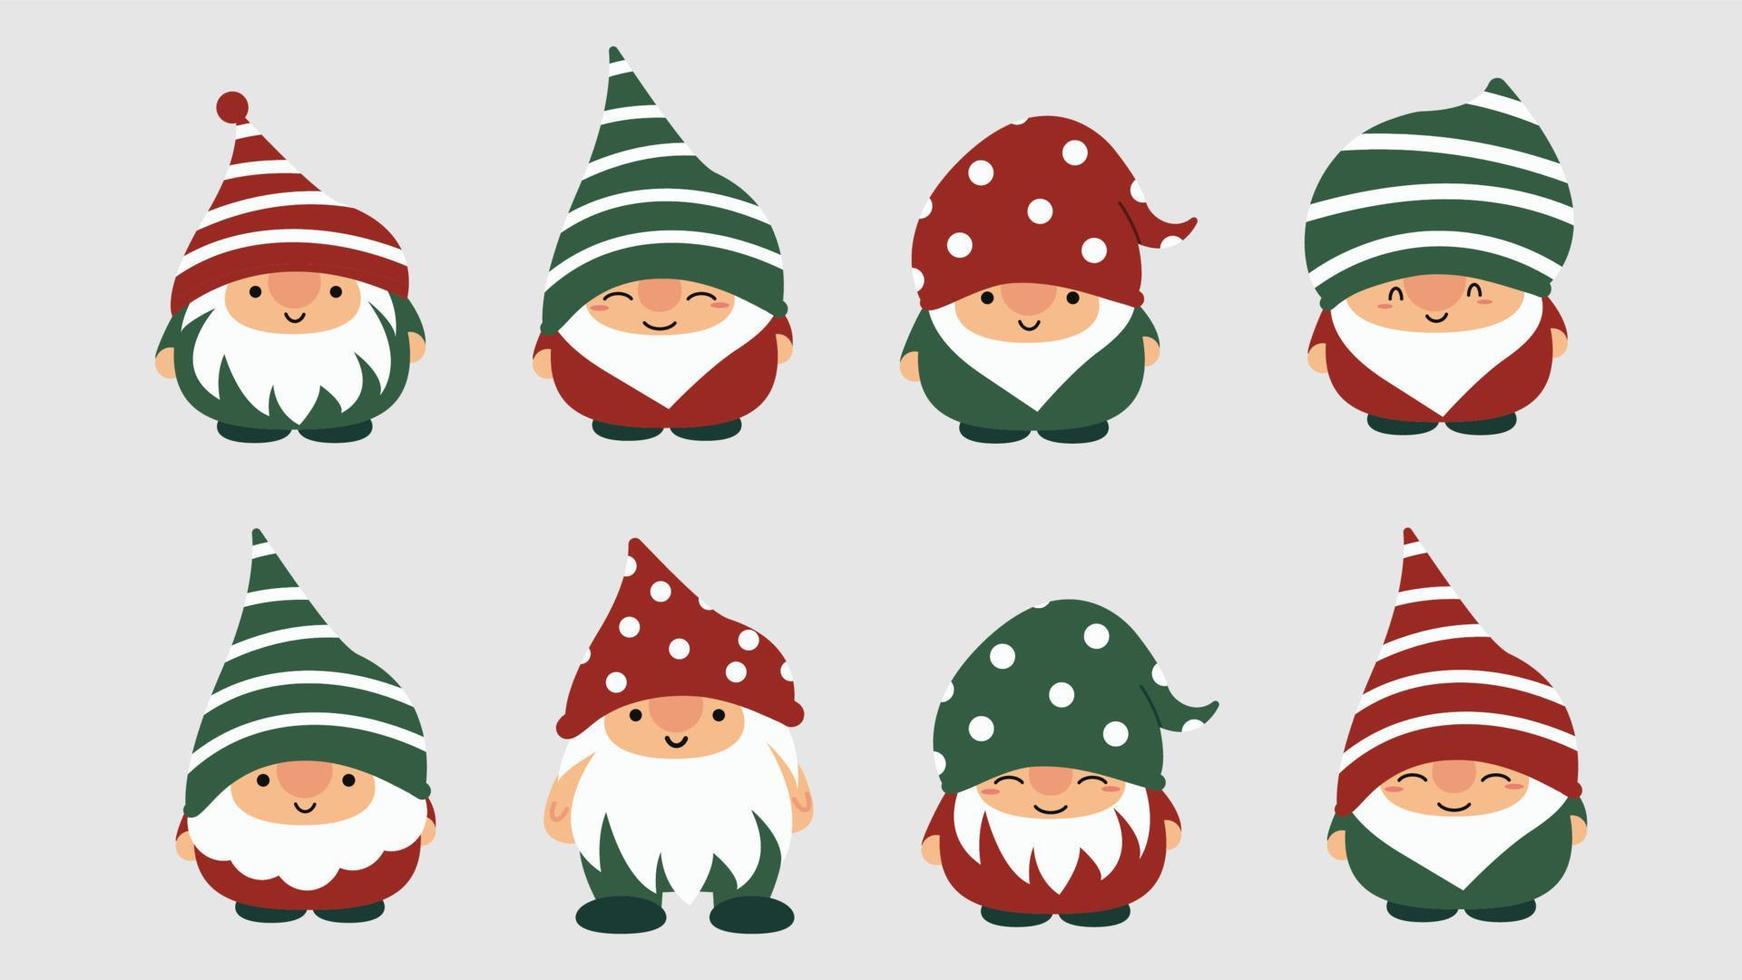 Little garden cute gnomes and elves in cartoon style. Characteristic fairies for children and kids. Kawaii gnome and magic elf design. Vector illustration.